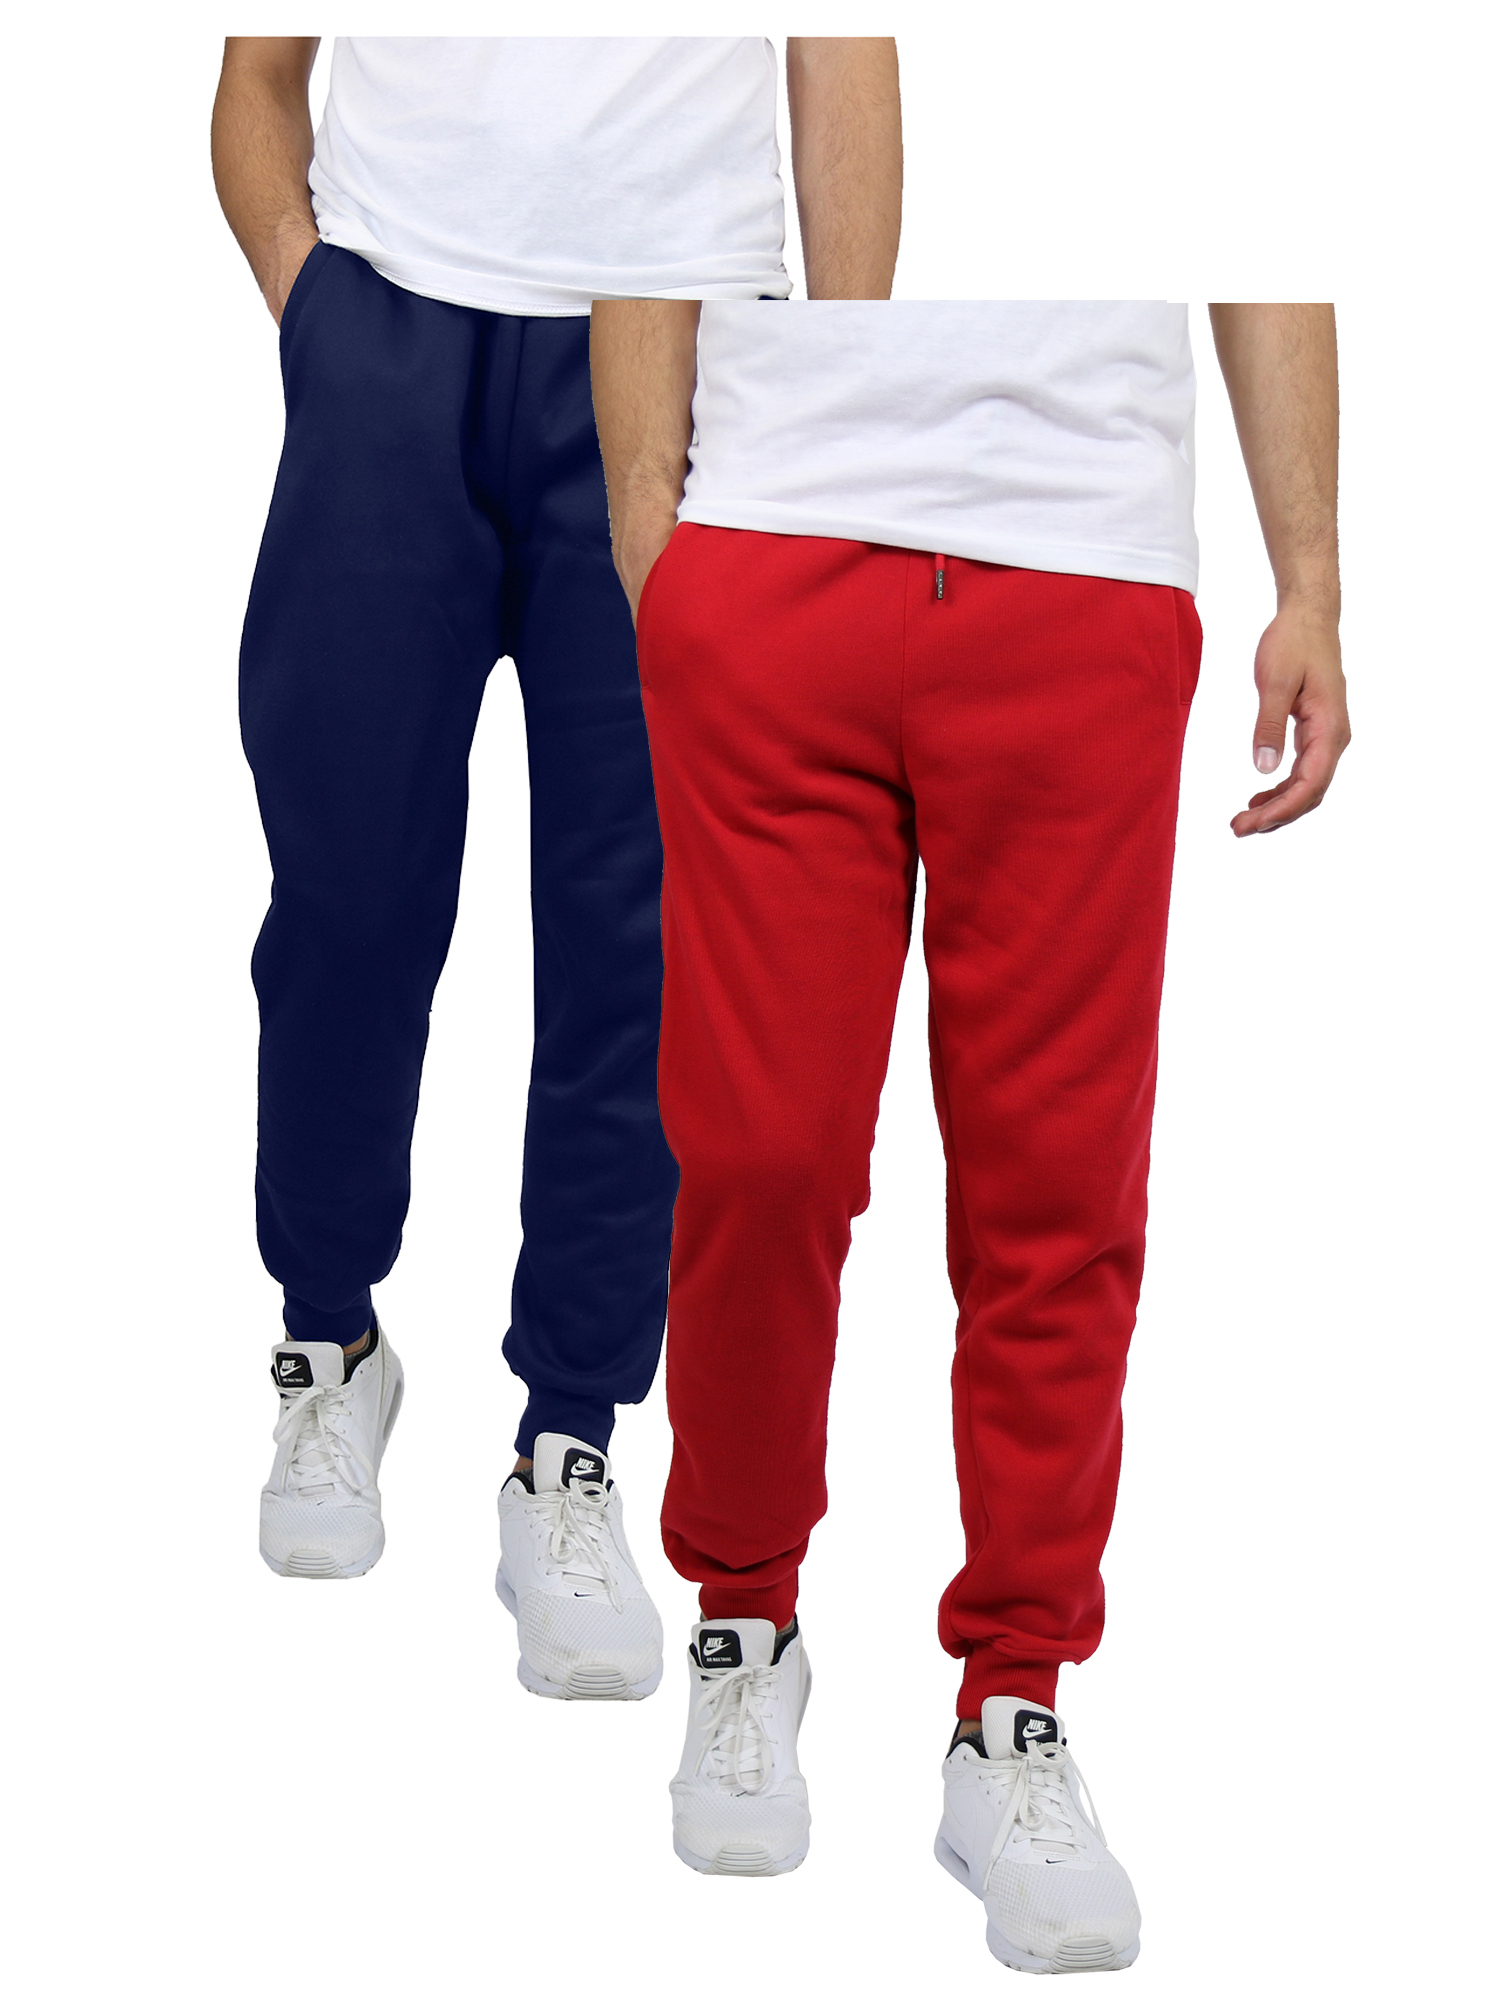 Galaxy by Harvic Men S Fleece Jogger Sweatpants (2-Pack & 3-Pack  S-2XL)